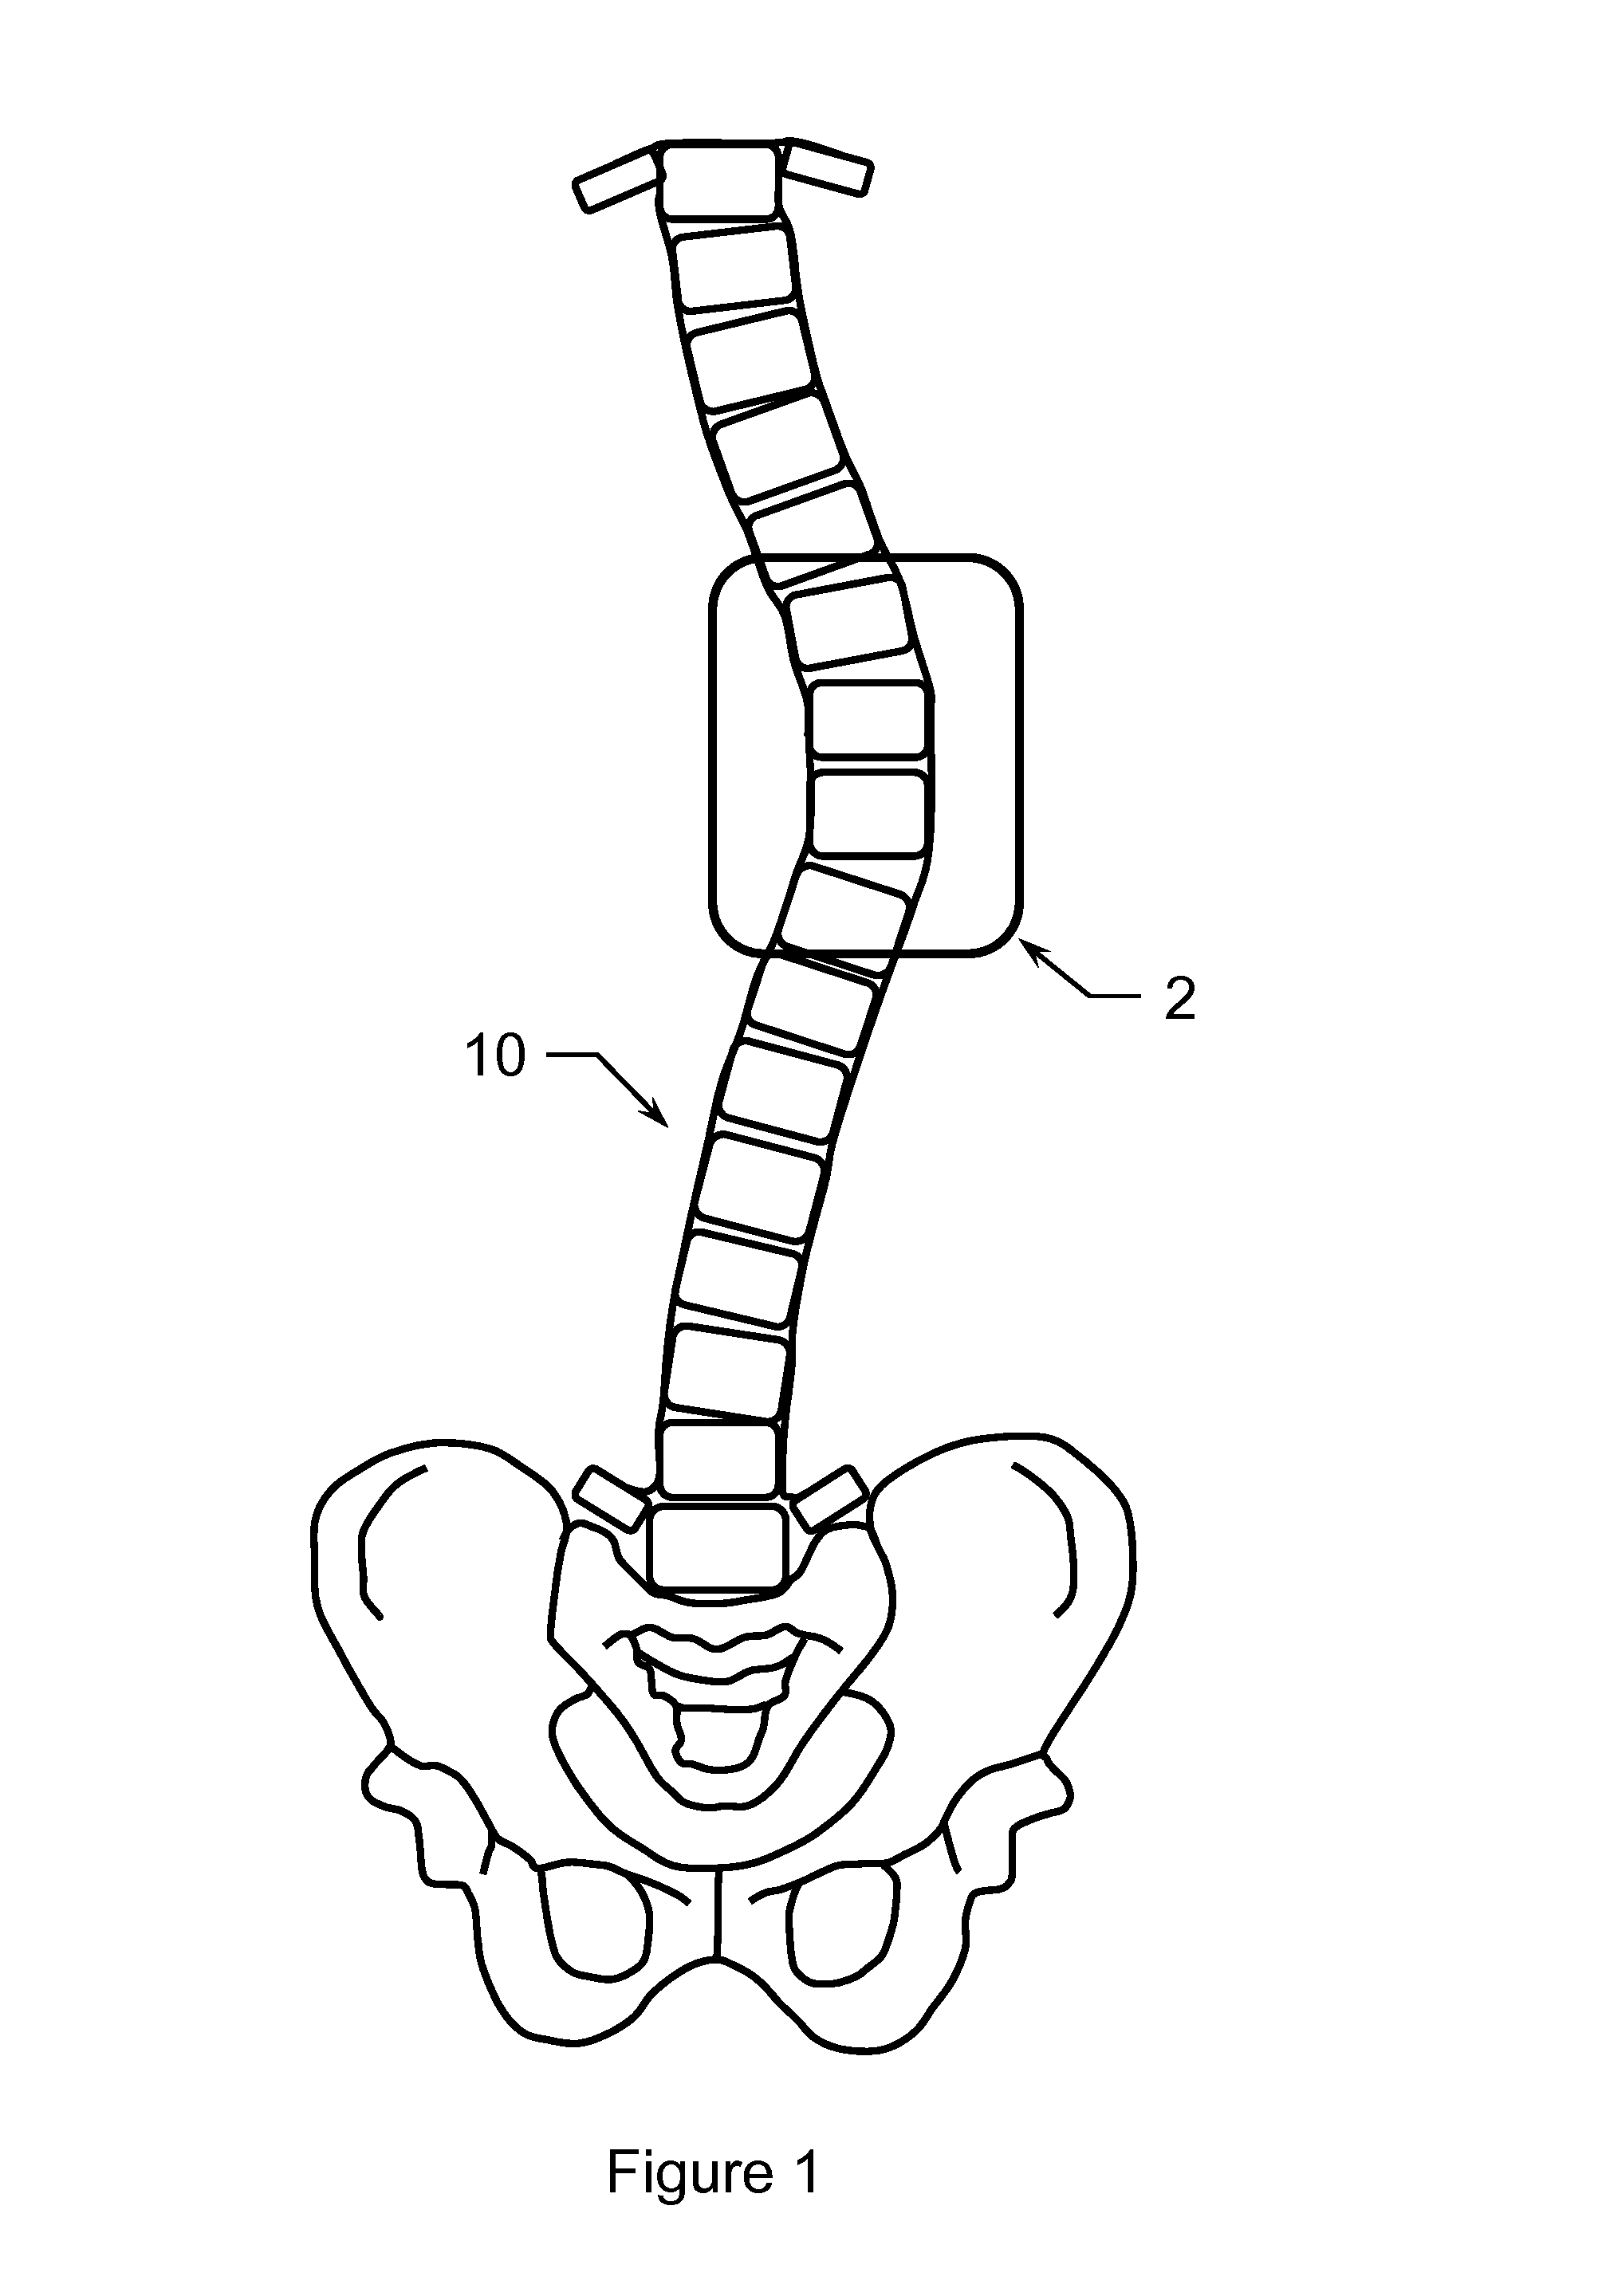 Method of treating scoliosis using a biological implant